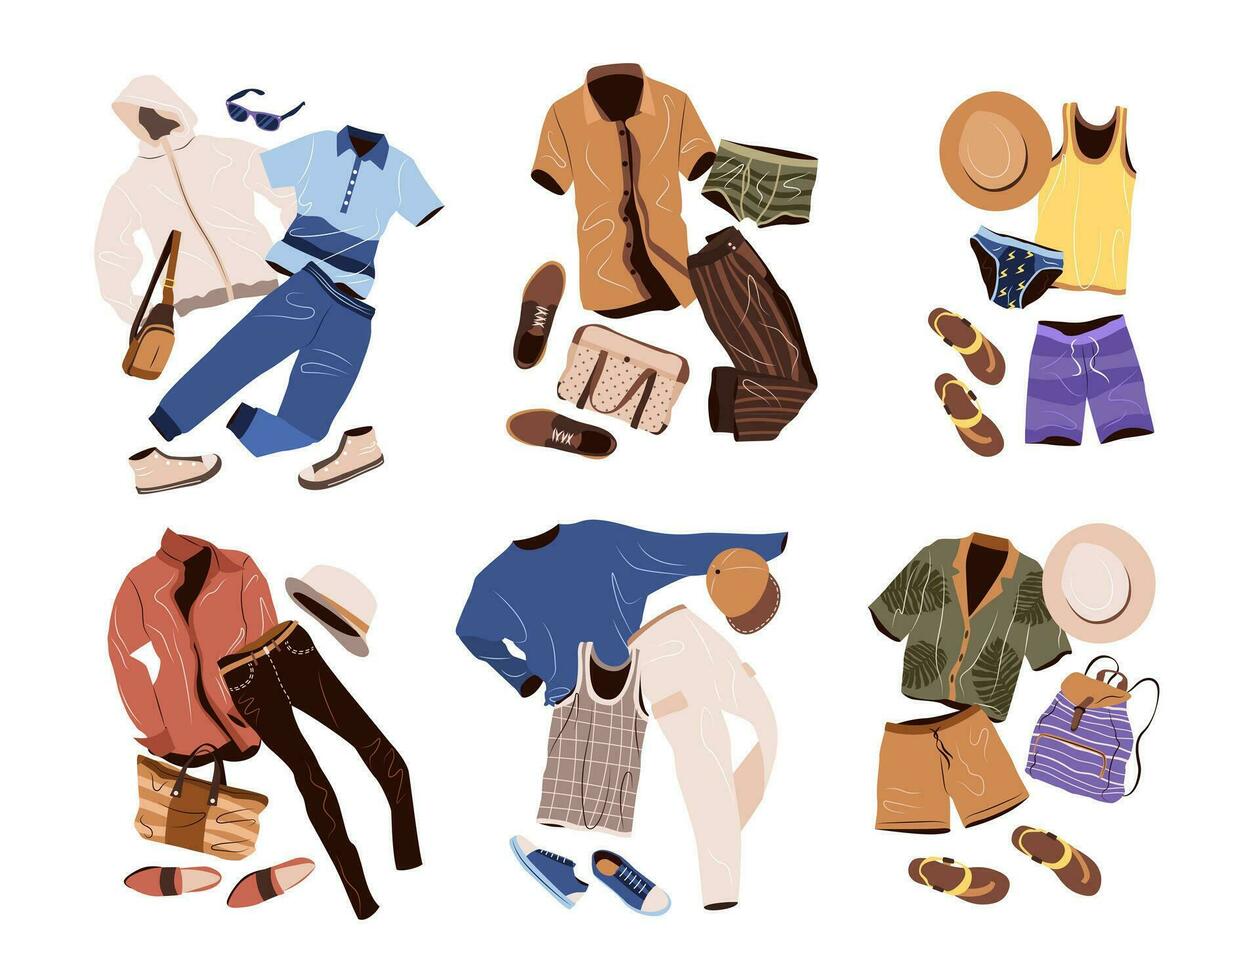 Outfits set in casual style for men. Fashion clothing, accessories, shoes for spring and summer. isolated flat vector illustrations on white background.